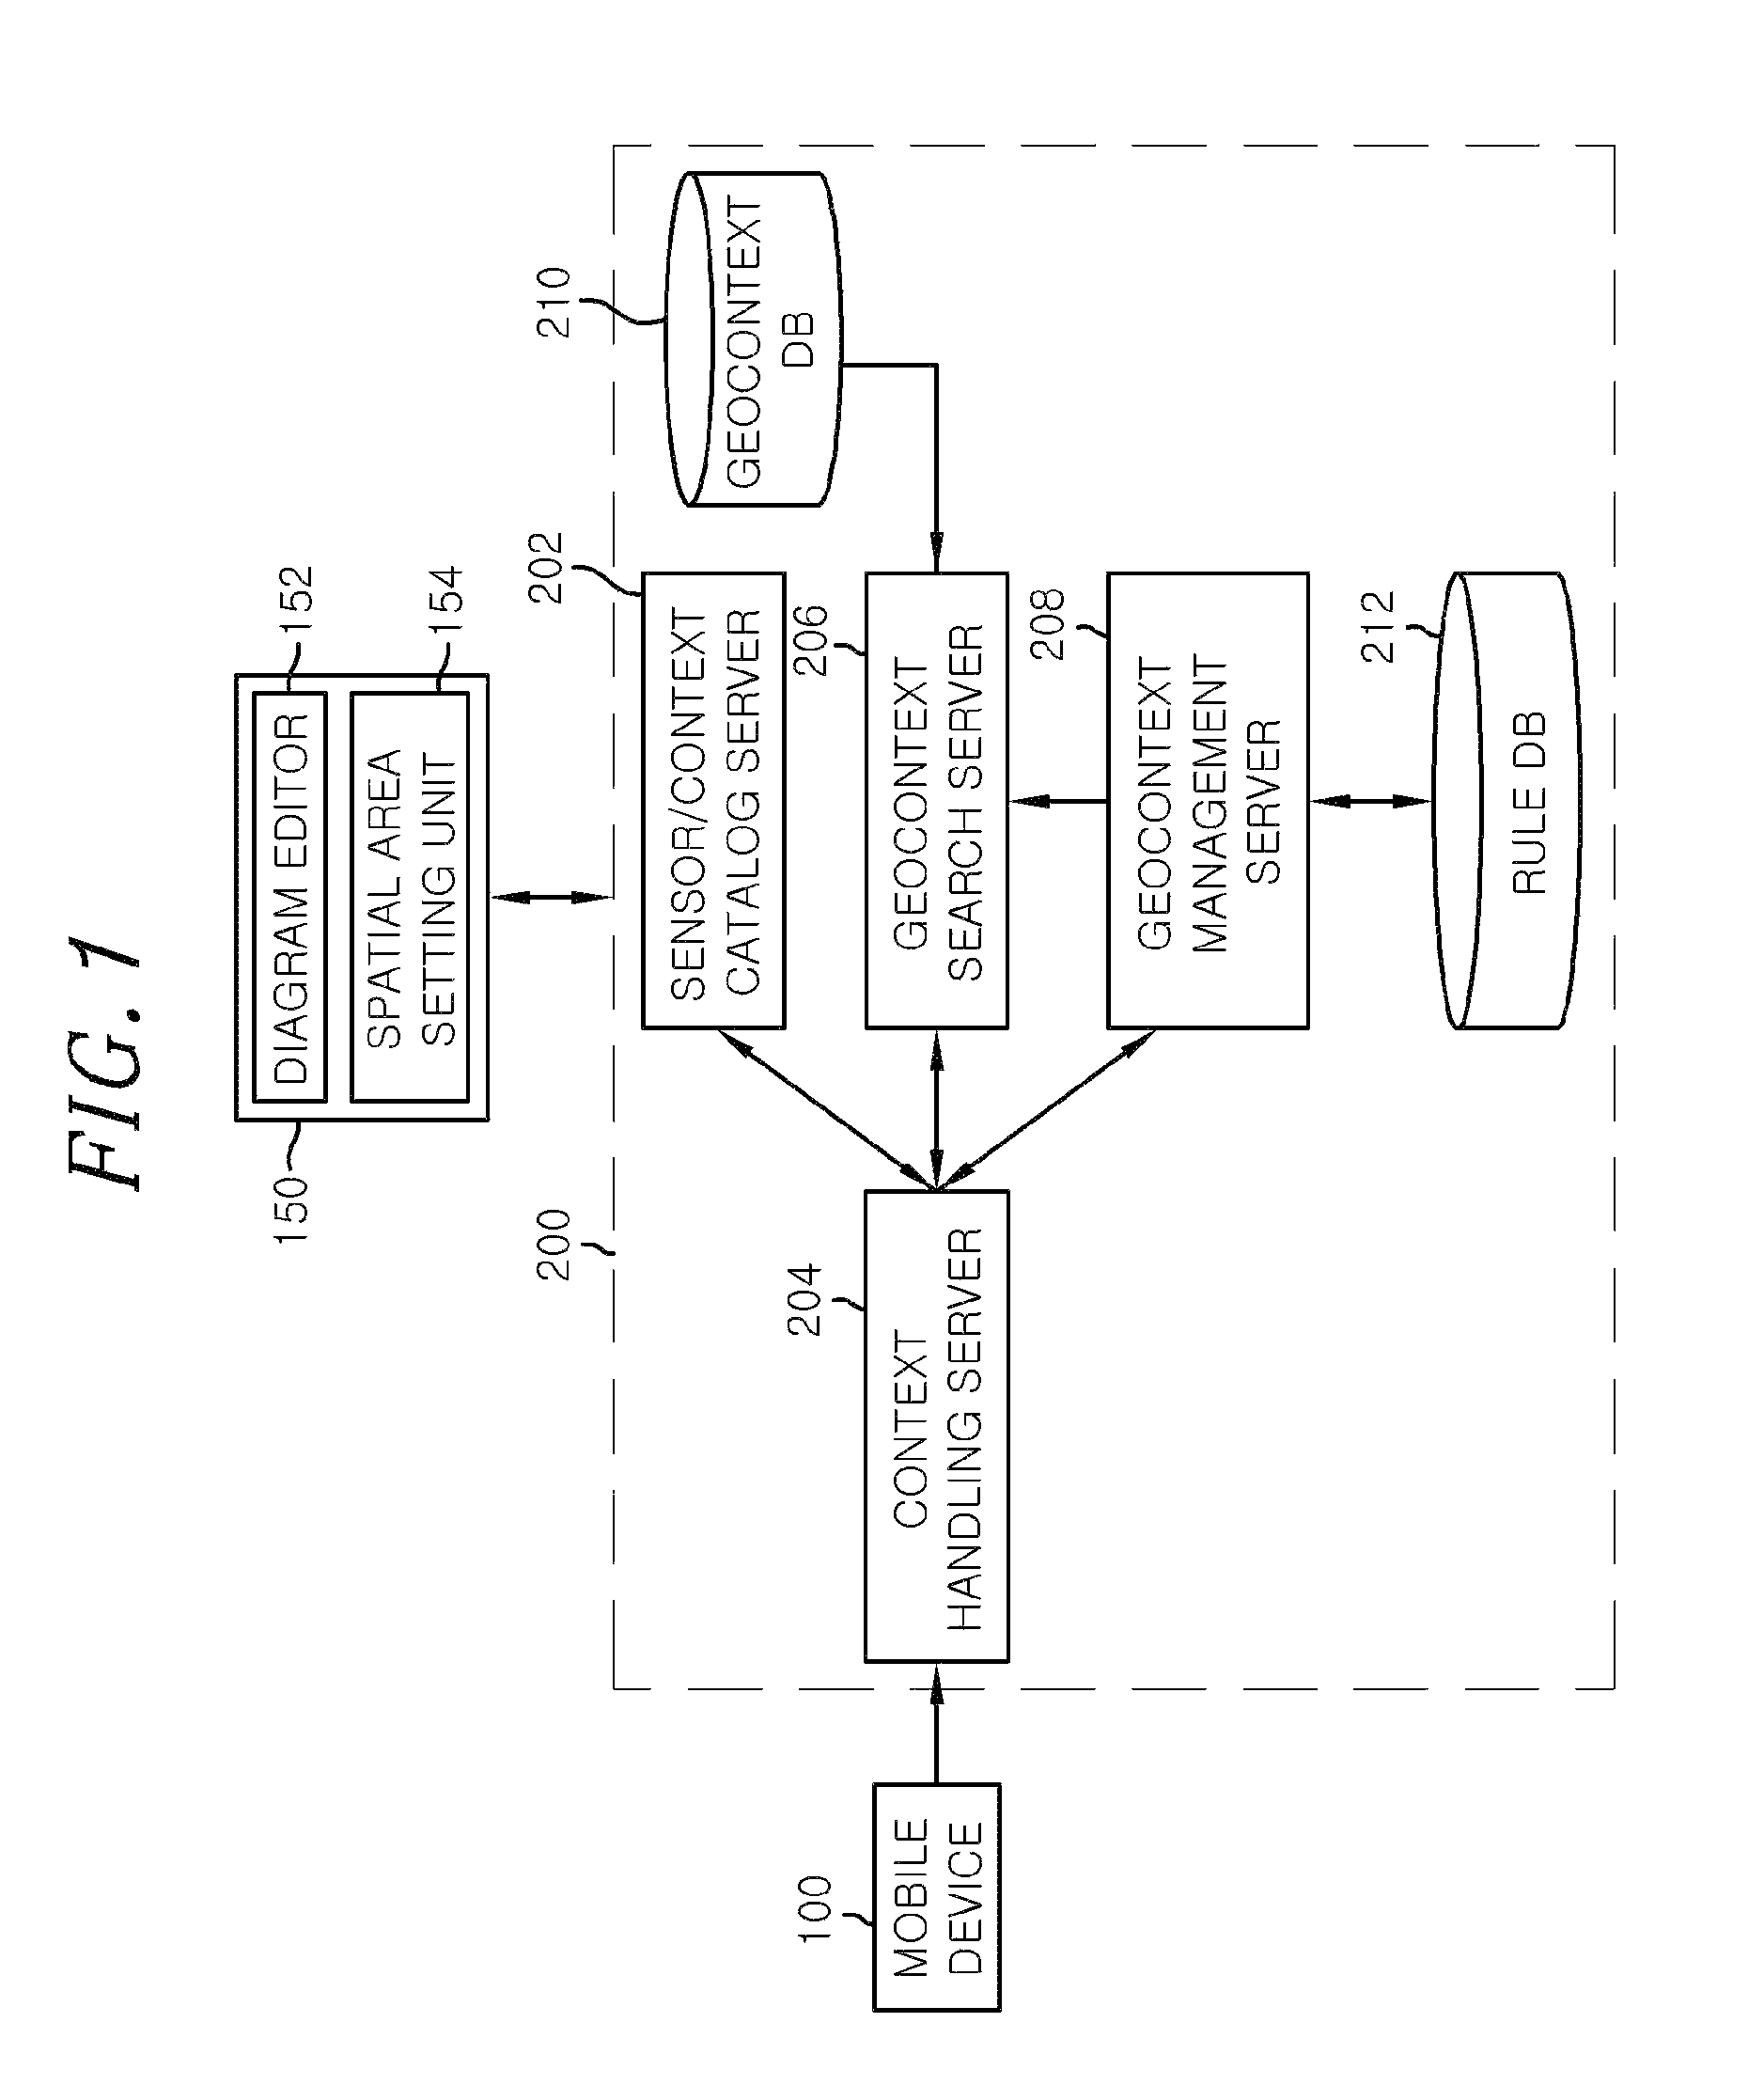 Method and system for providing spatial-based context-aware service